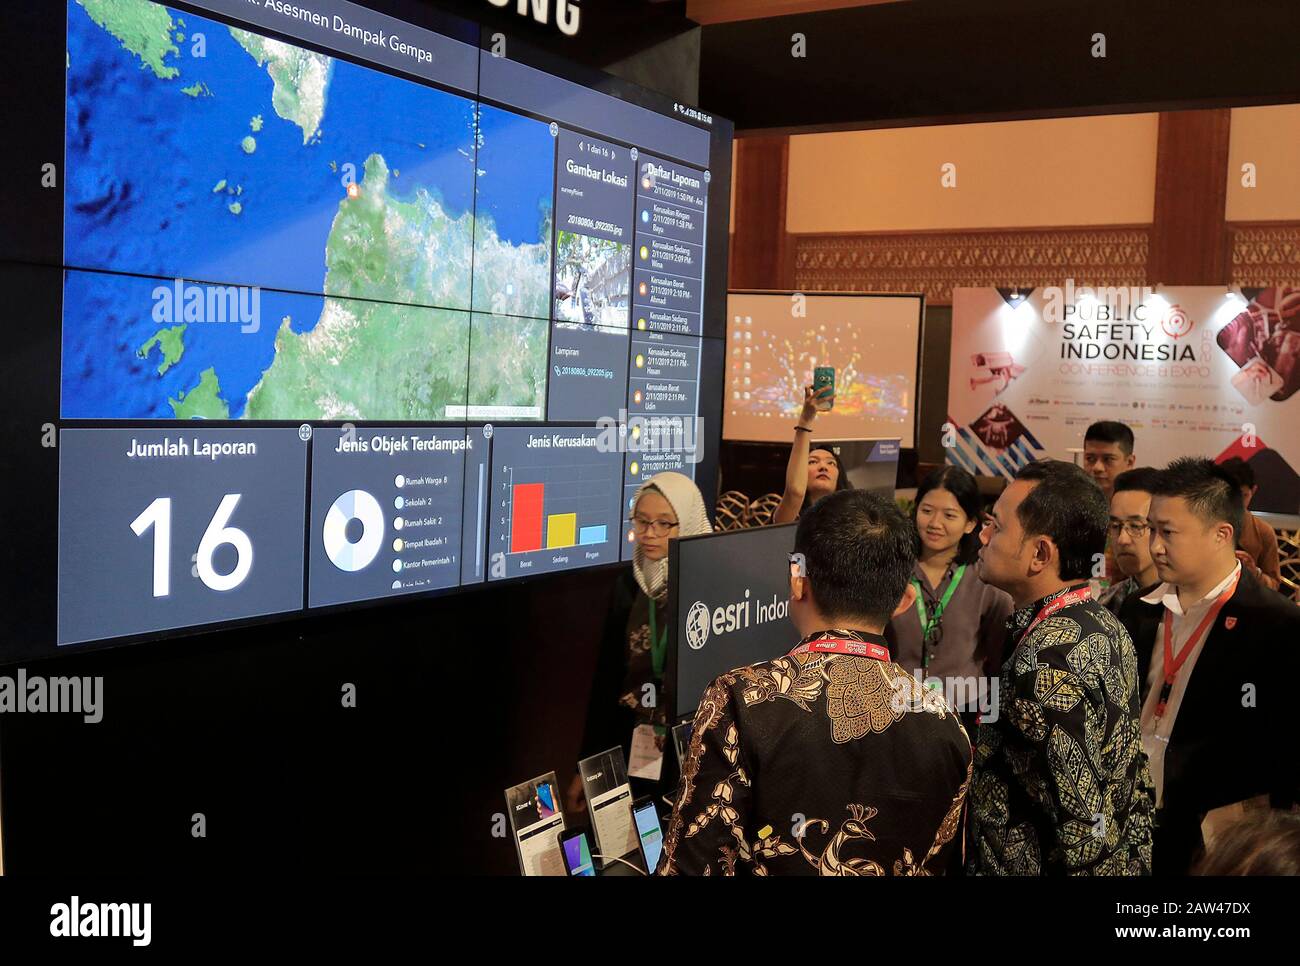 A visitor was seen looking for information on robot technology at the 2019 Public Safety Indonesia Conference & Expo exhibition. Public Safety Indonesia 2019 was attended by more than 120 industry stakeholder exhibitors on innovative products, services, and solutions in the field of physical security equipment, products, and services, network, and cyber, the exhibition lasts until March 1, 2019. Stock Photo